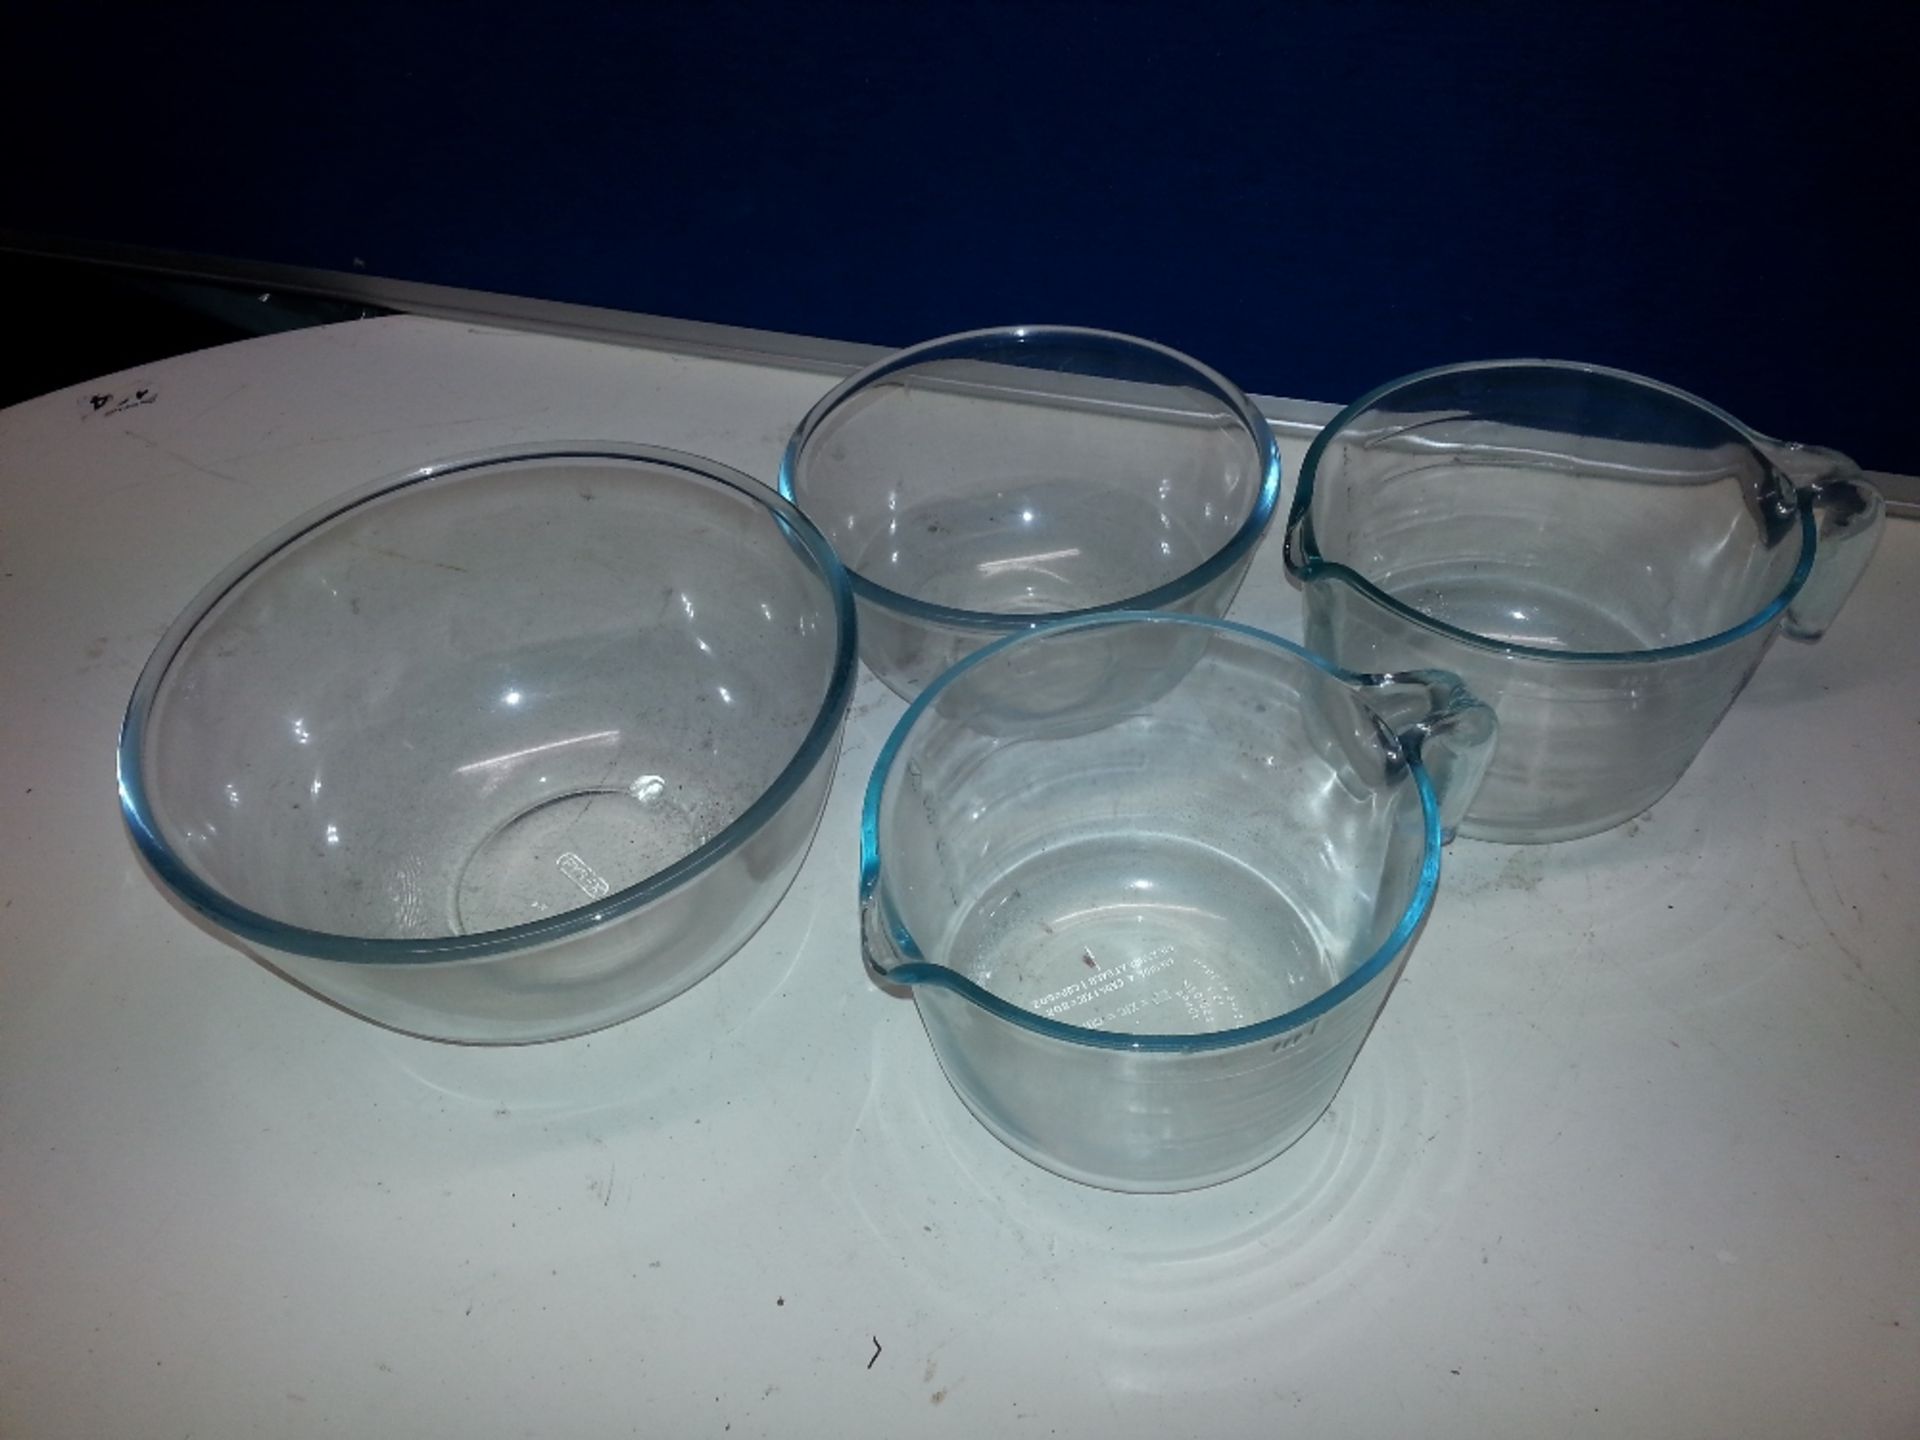 2x Glass mixing bowls and jugs